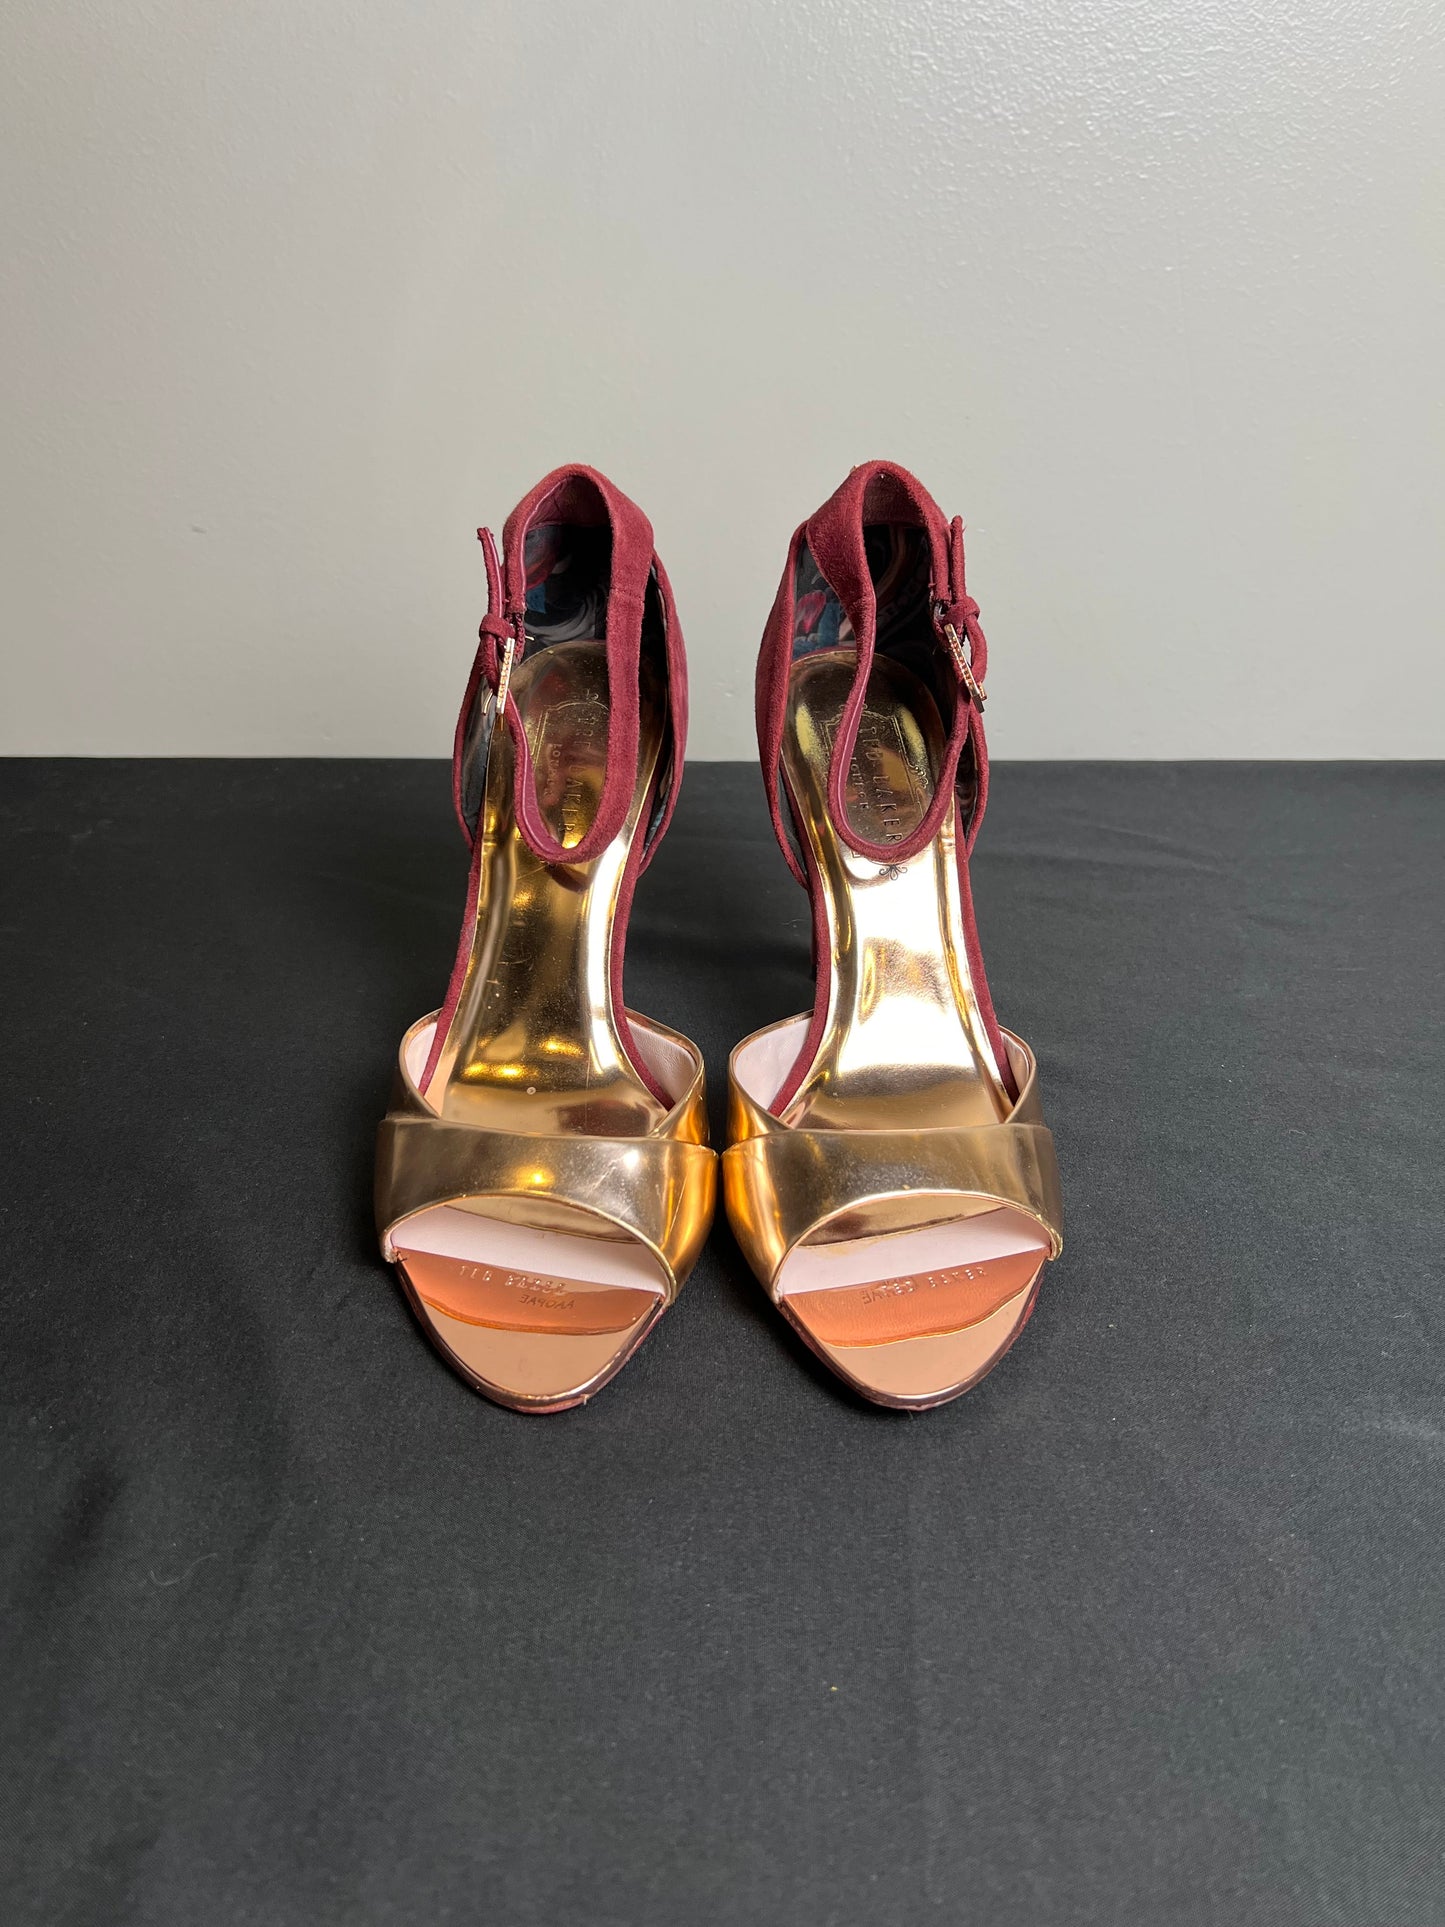 Sandals Heels Stiletto By Ted Baker  Size: 6.5